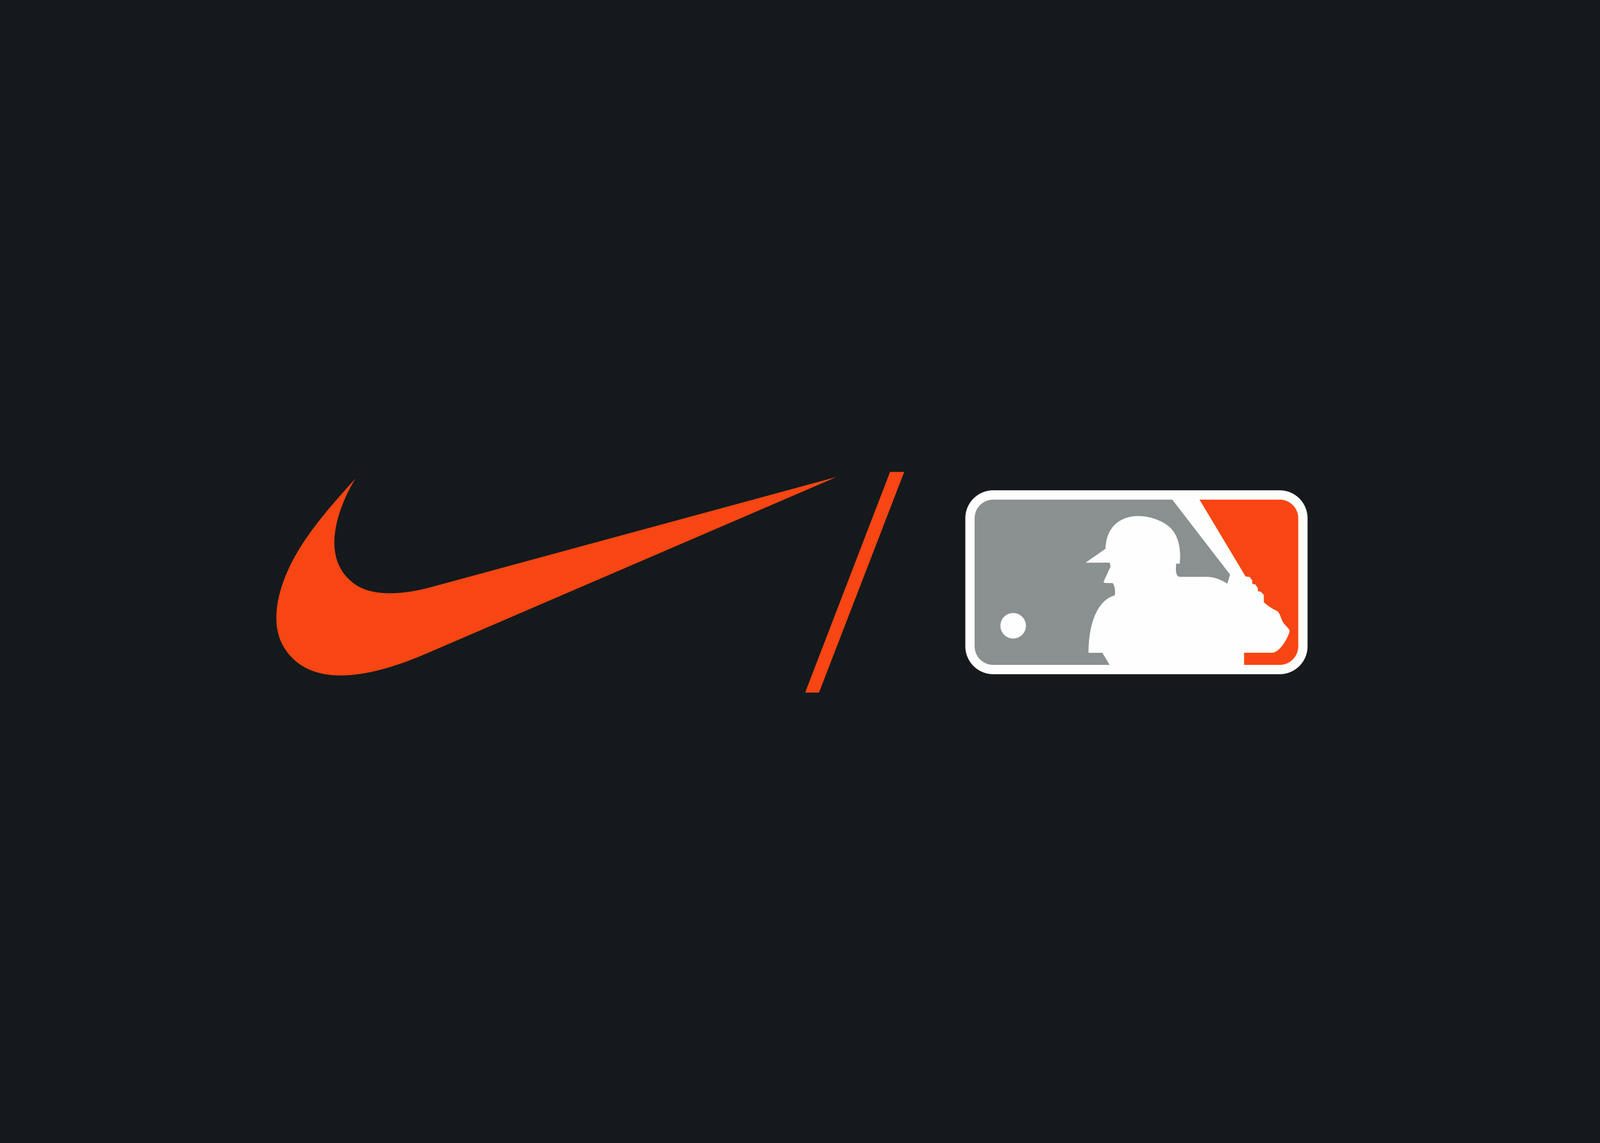 mlb and nike deal